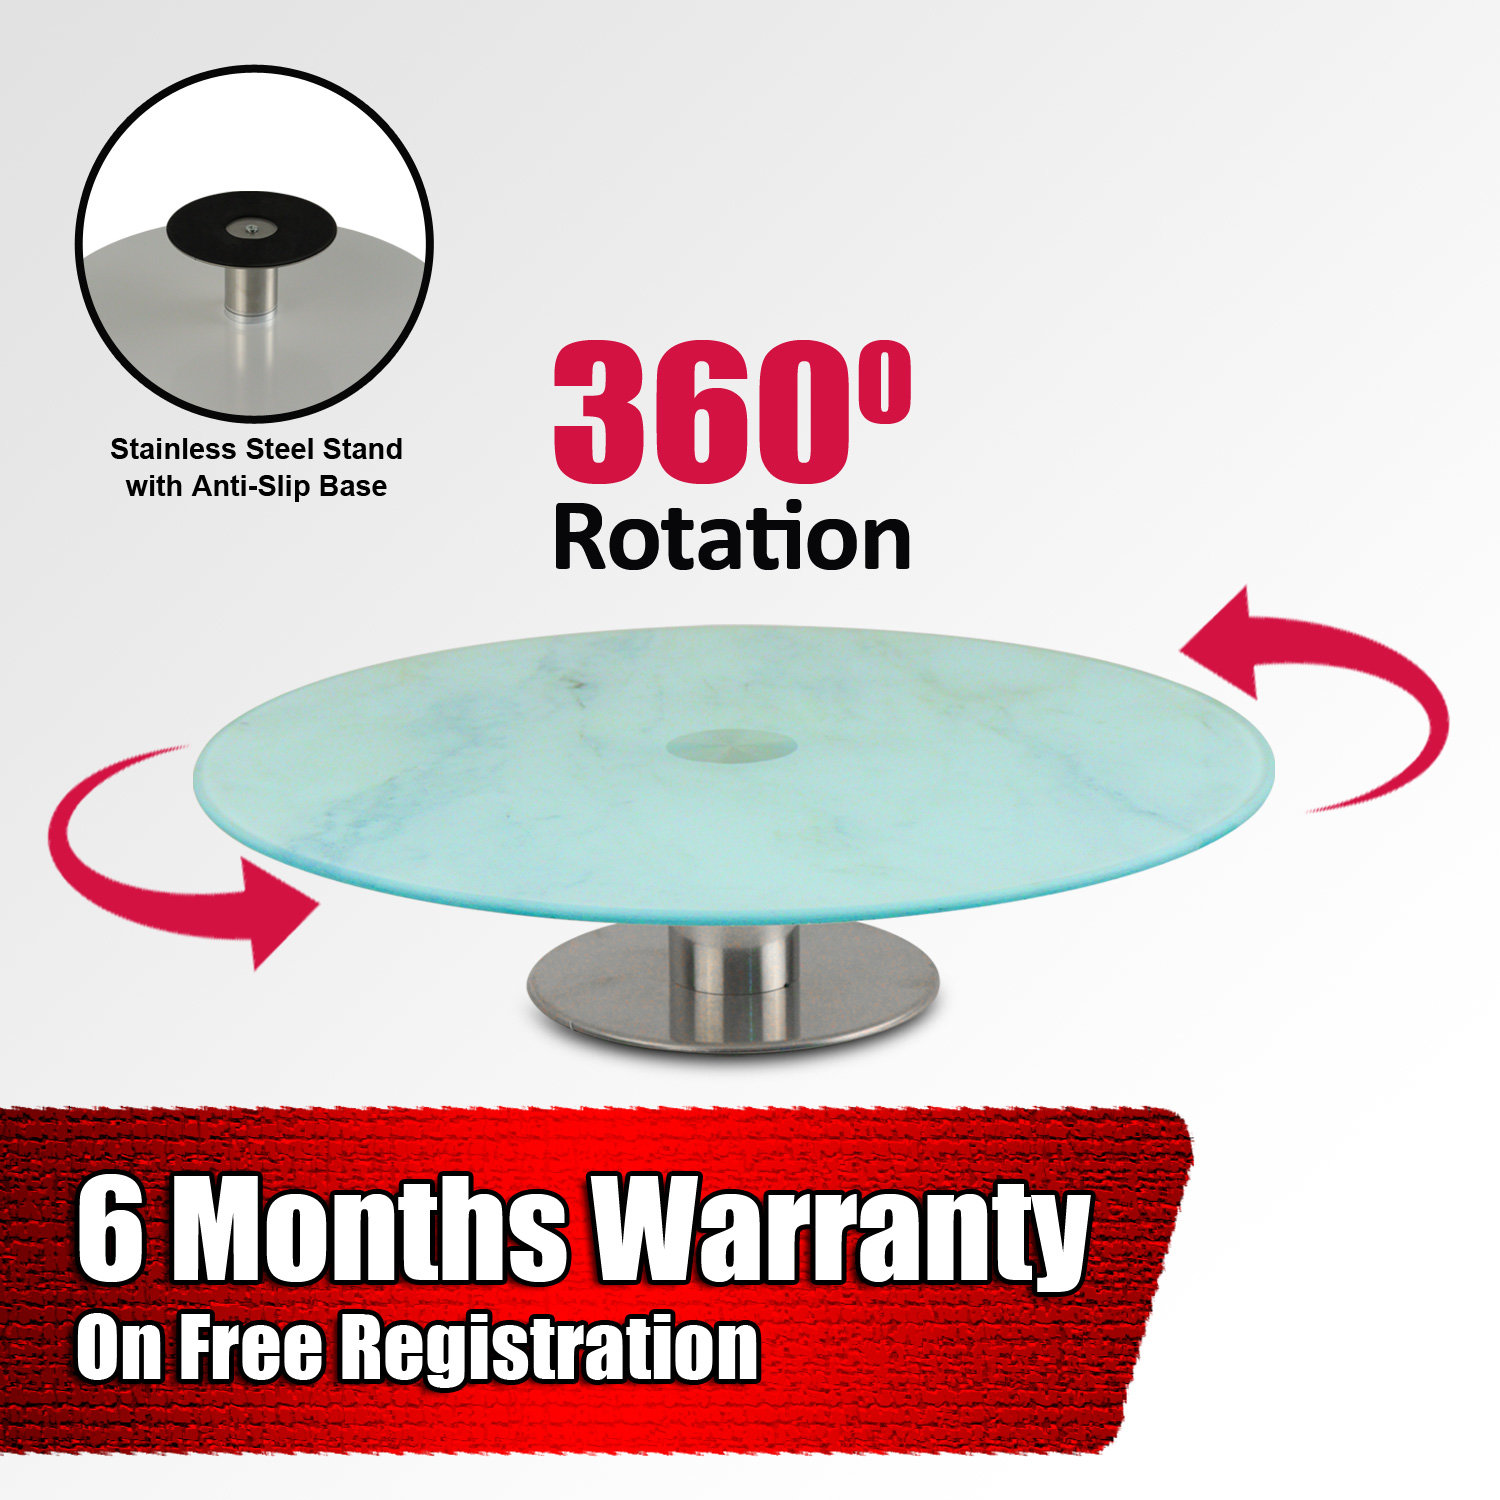 Ibell rotating cake stand 30 cm premium glass and stainless steel